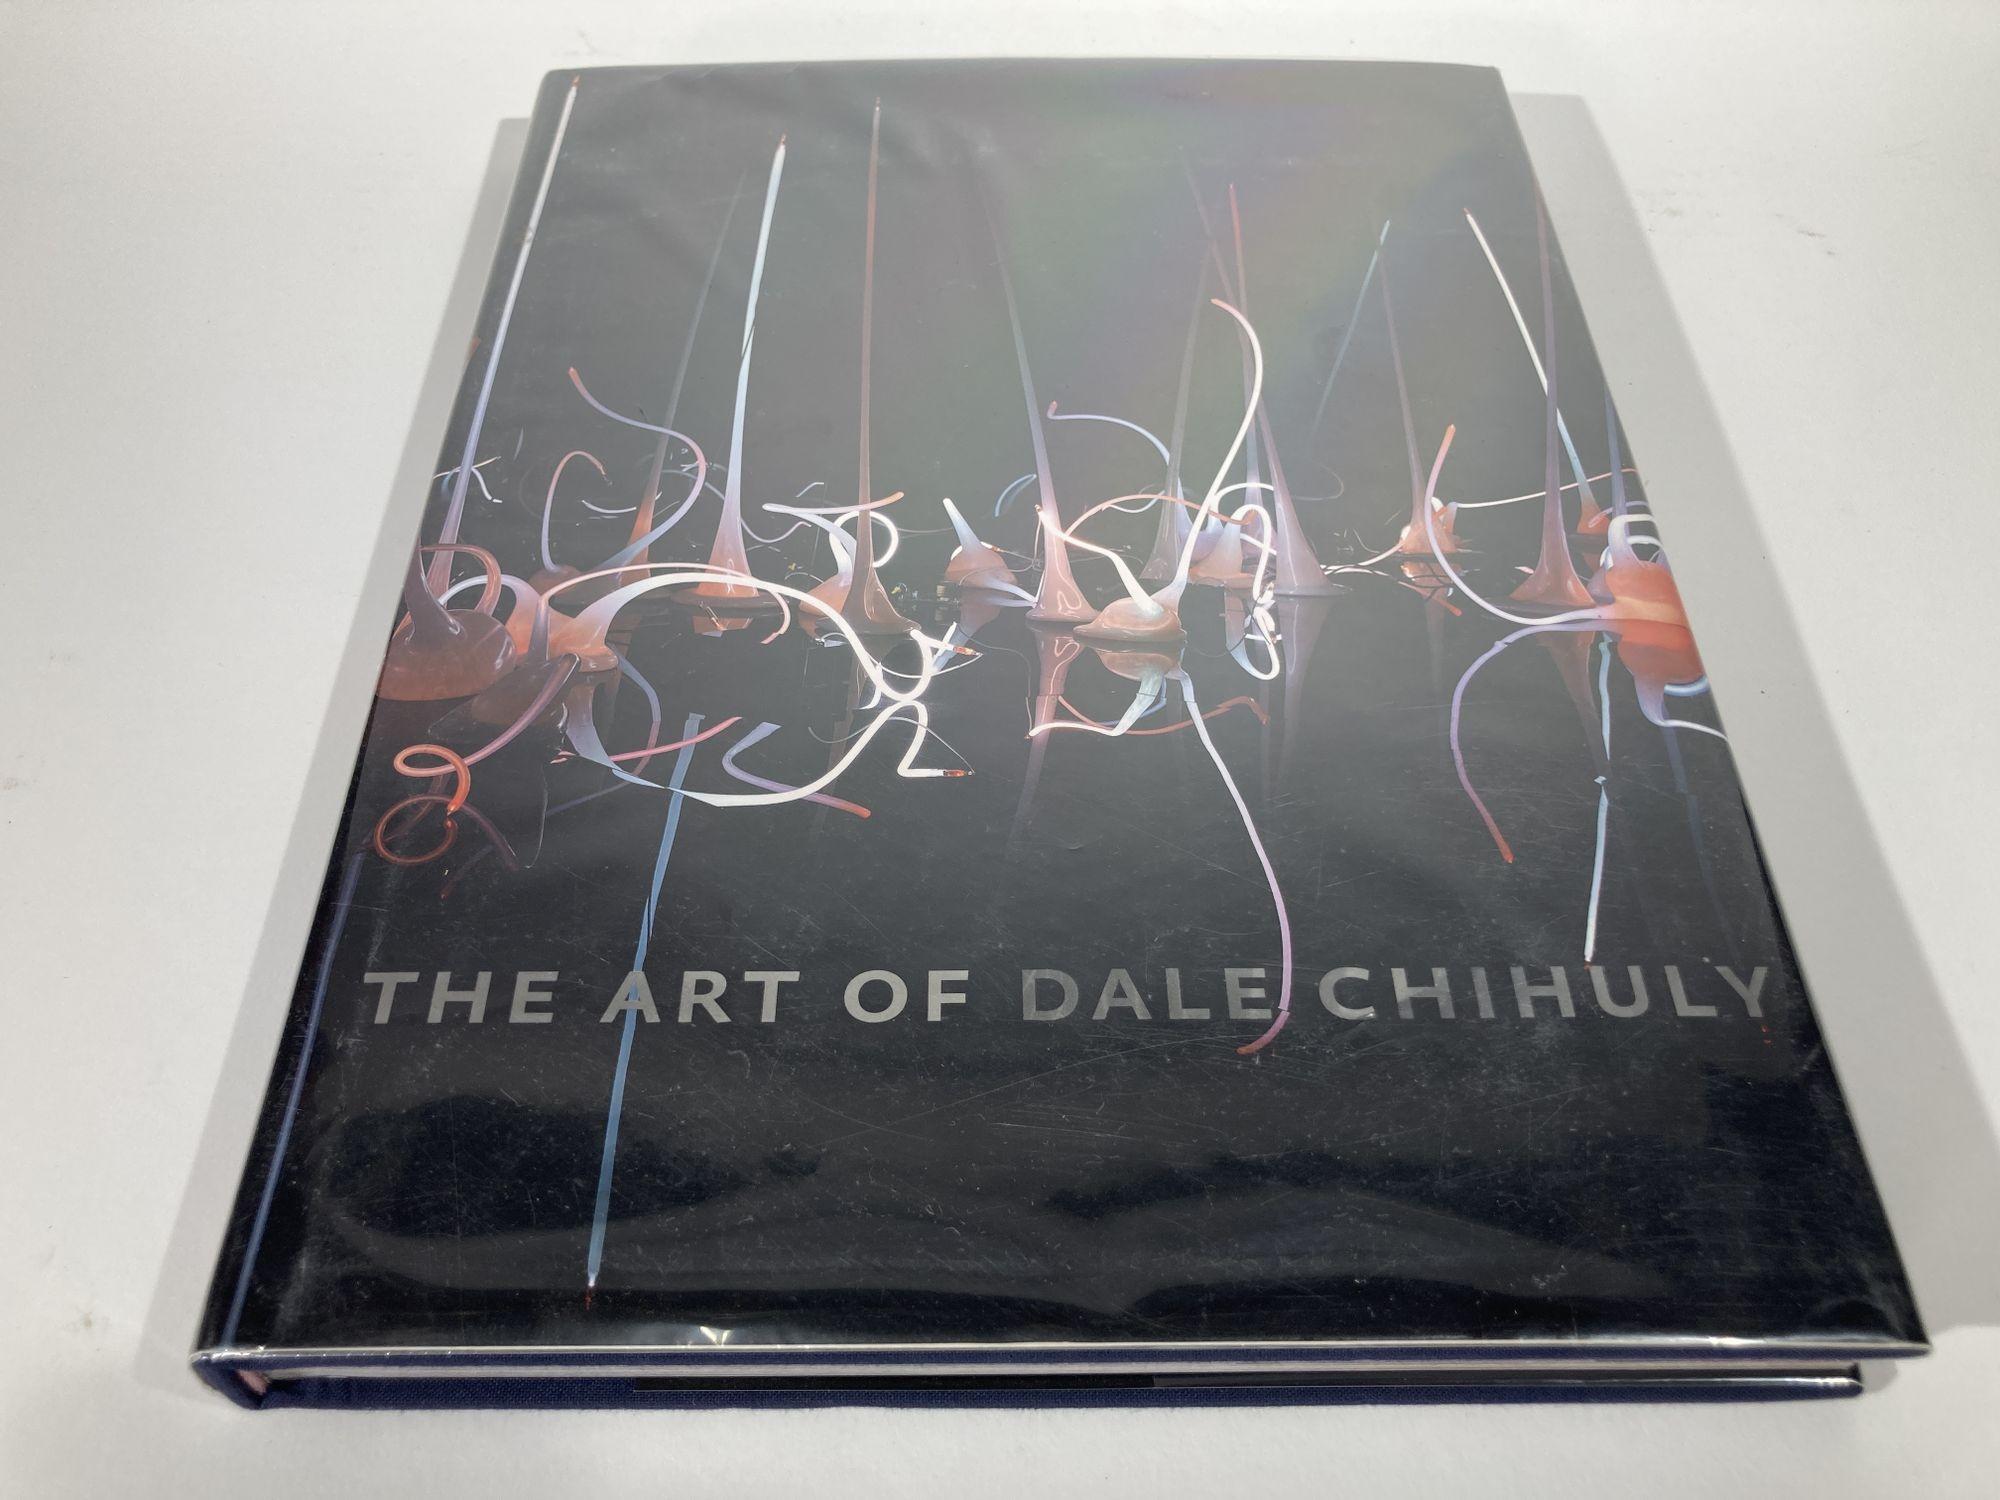 Title: The Art of Dale Chihuly.
